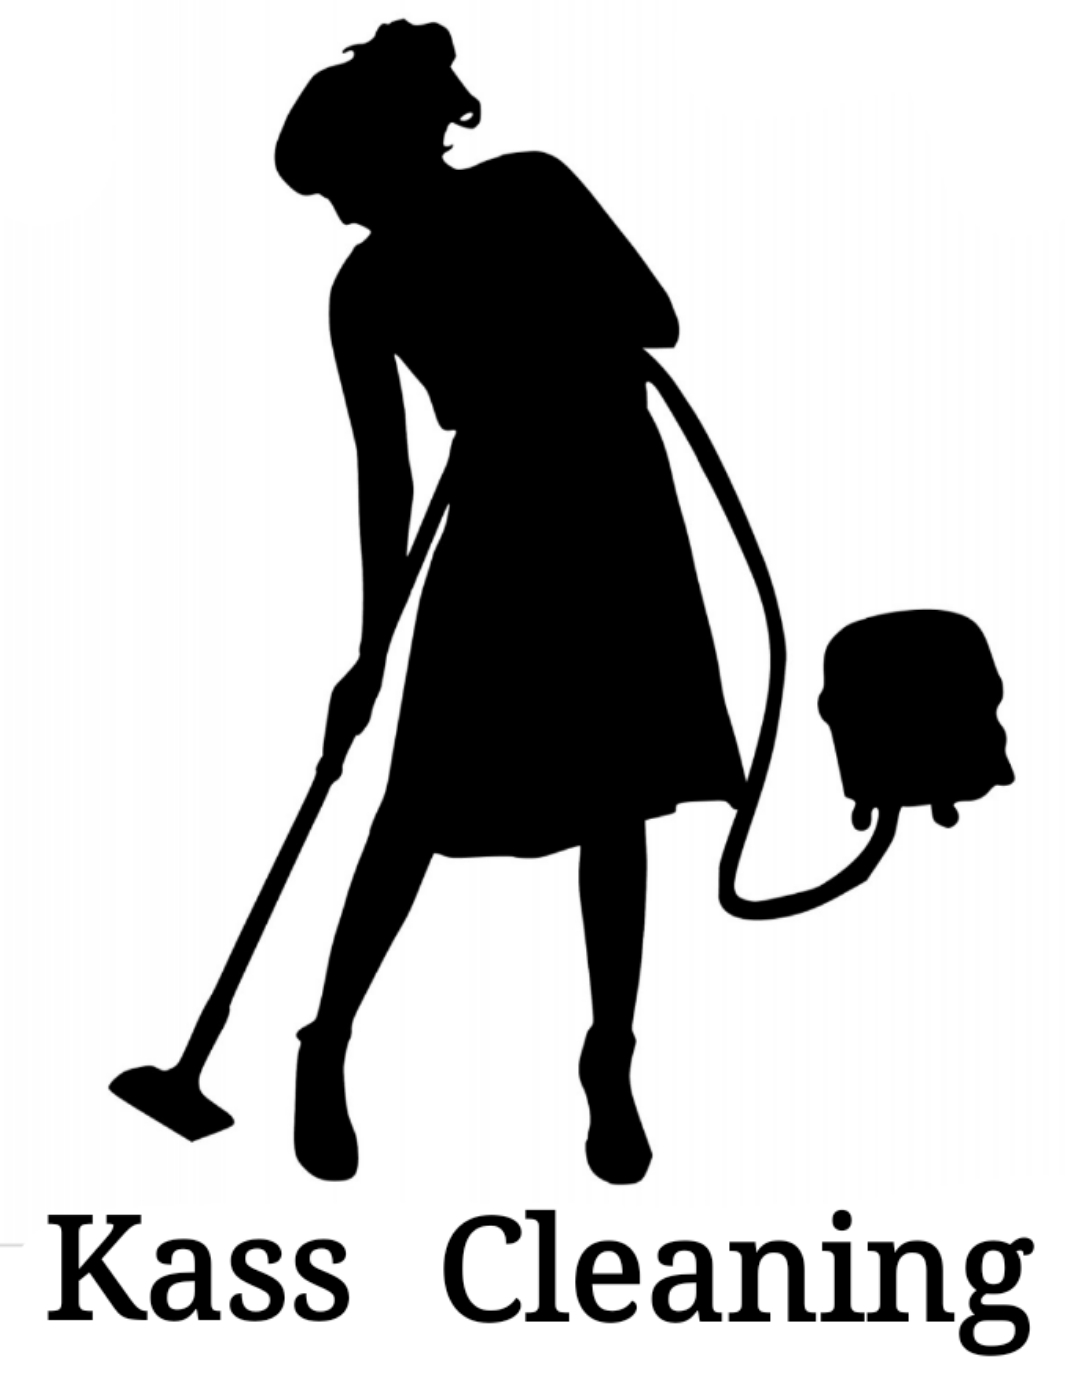 Kass Cleaning Service Logo